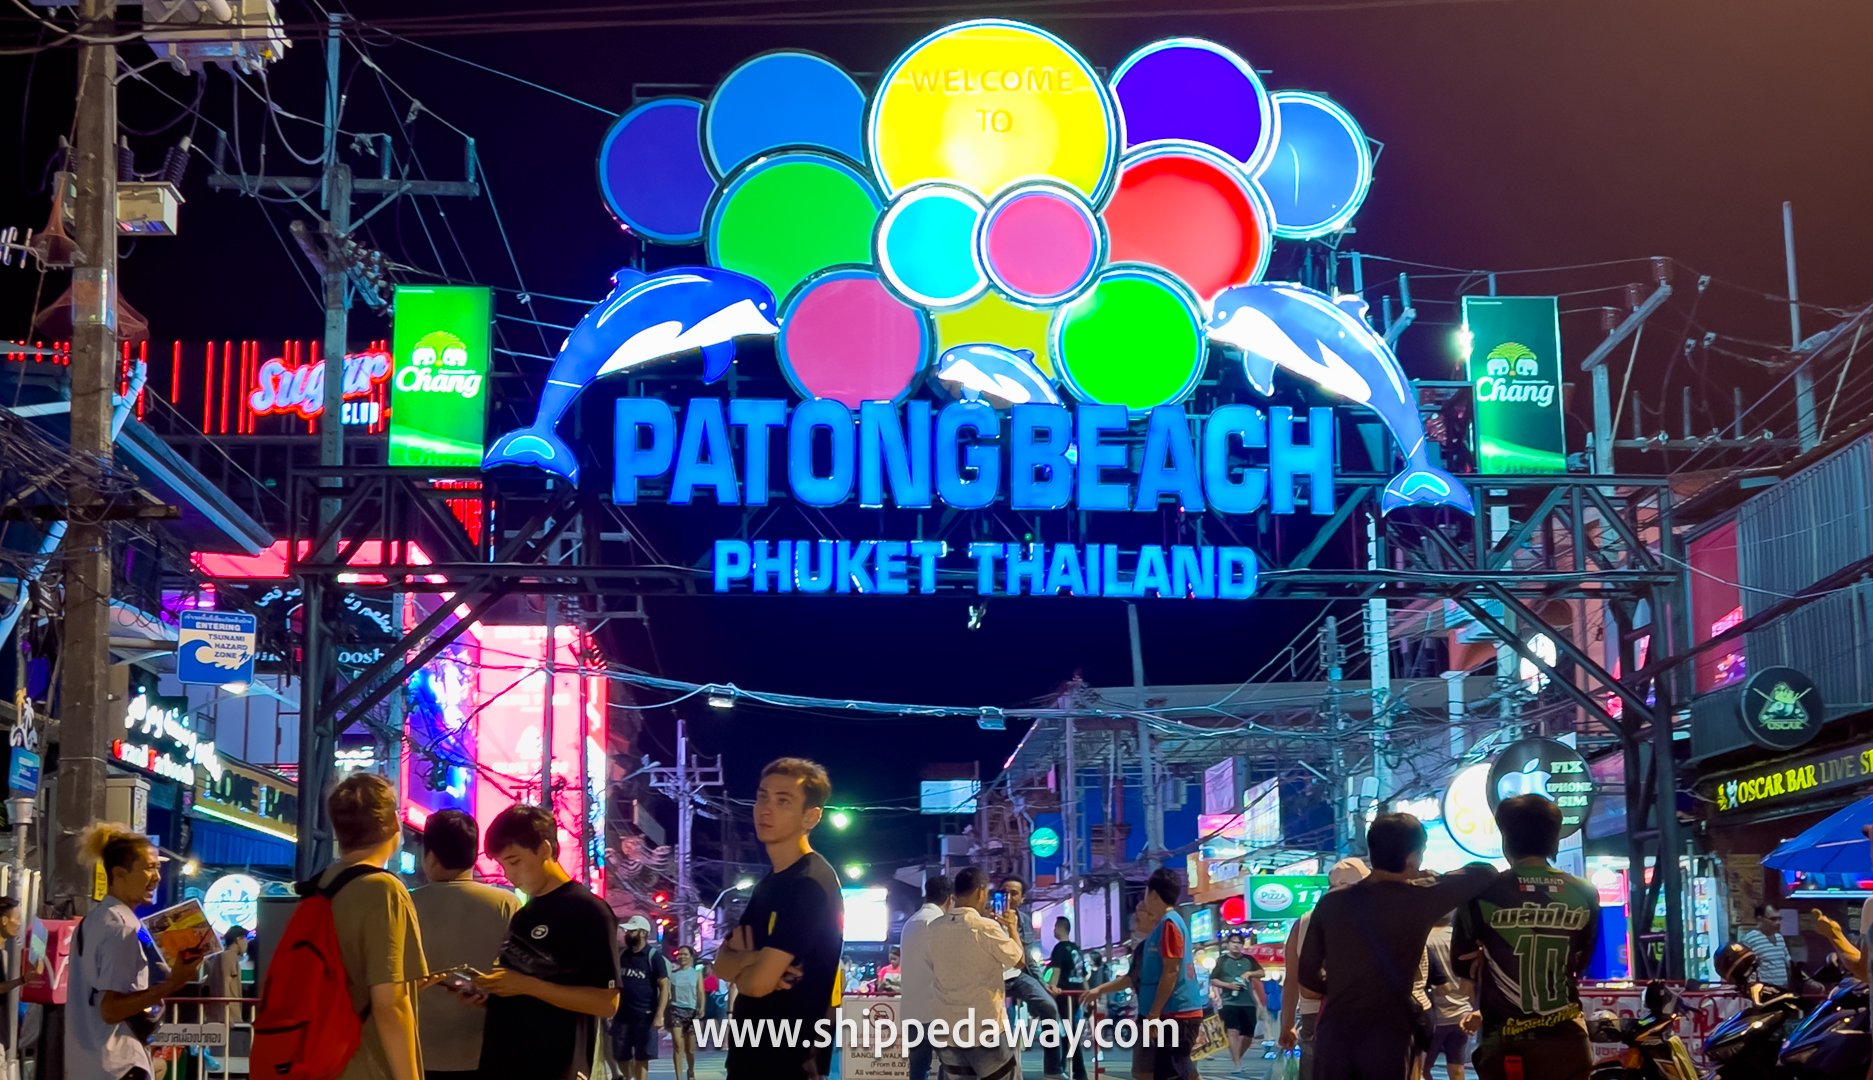 Patong Beach - where to stay in Phuket, best places to stay in Phuket, best areas to stay in Phuket, best Phuket hotels, best hotels in Phuket, best resorts in Phuket, best Phuket resorts, best Phuket hostels, budget stays in Phuket, Phuket budget accommodation, nightlife on Patong Beach, Bangla Road